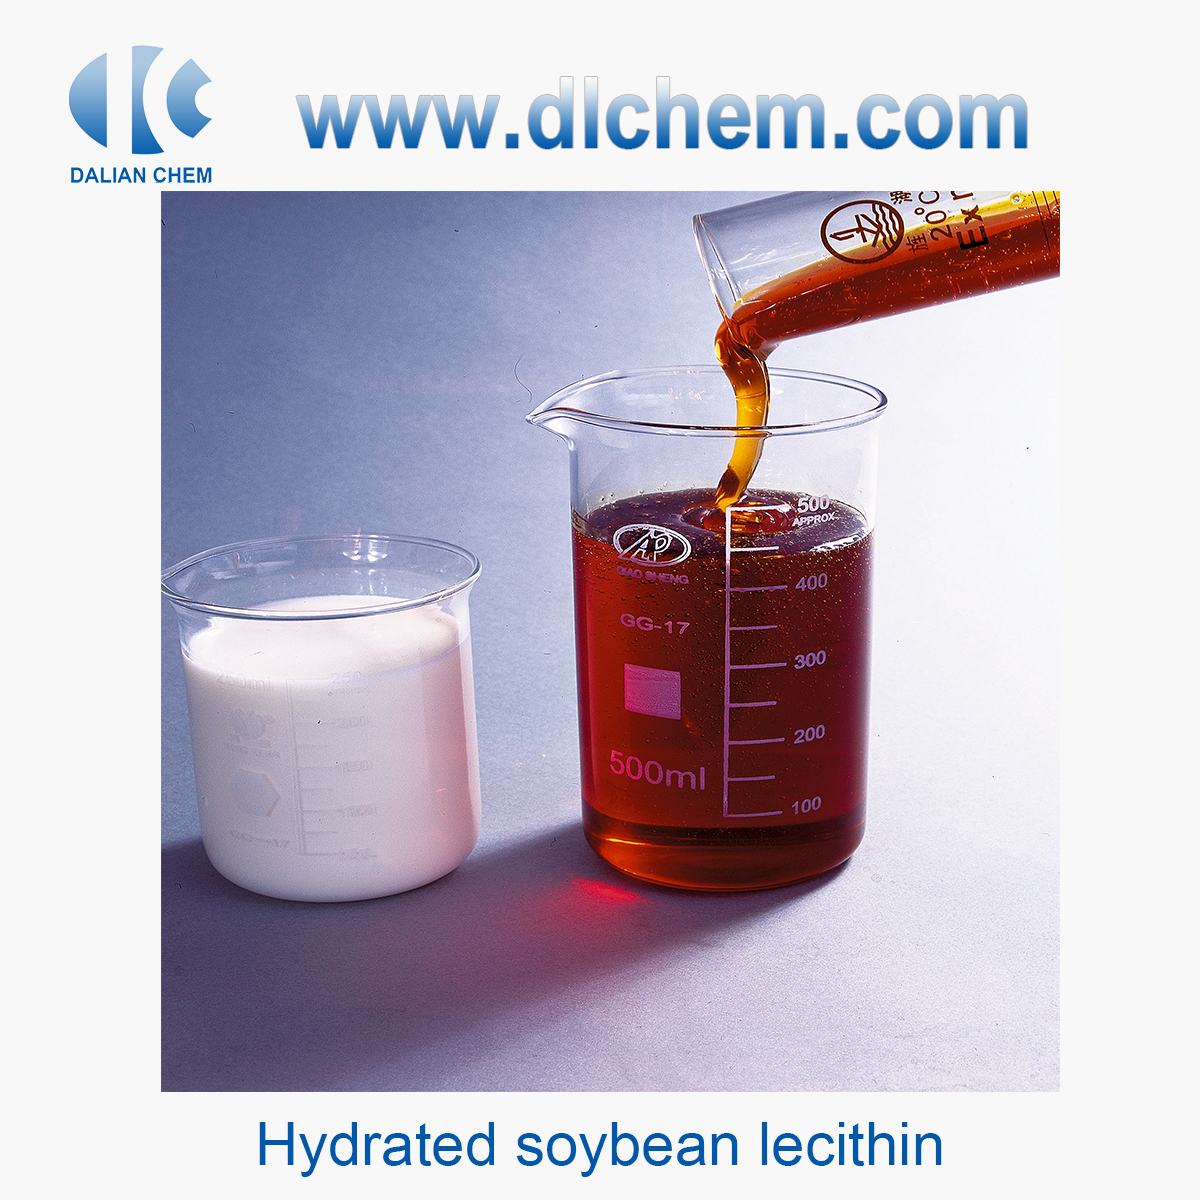 Hydrated soybean lecithin